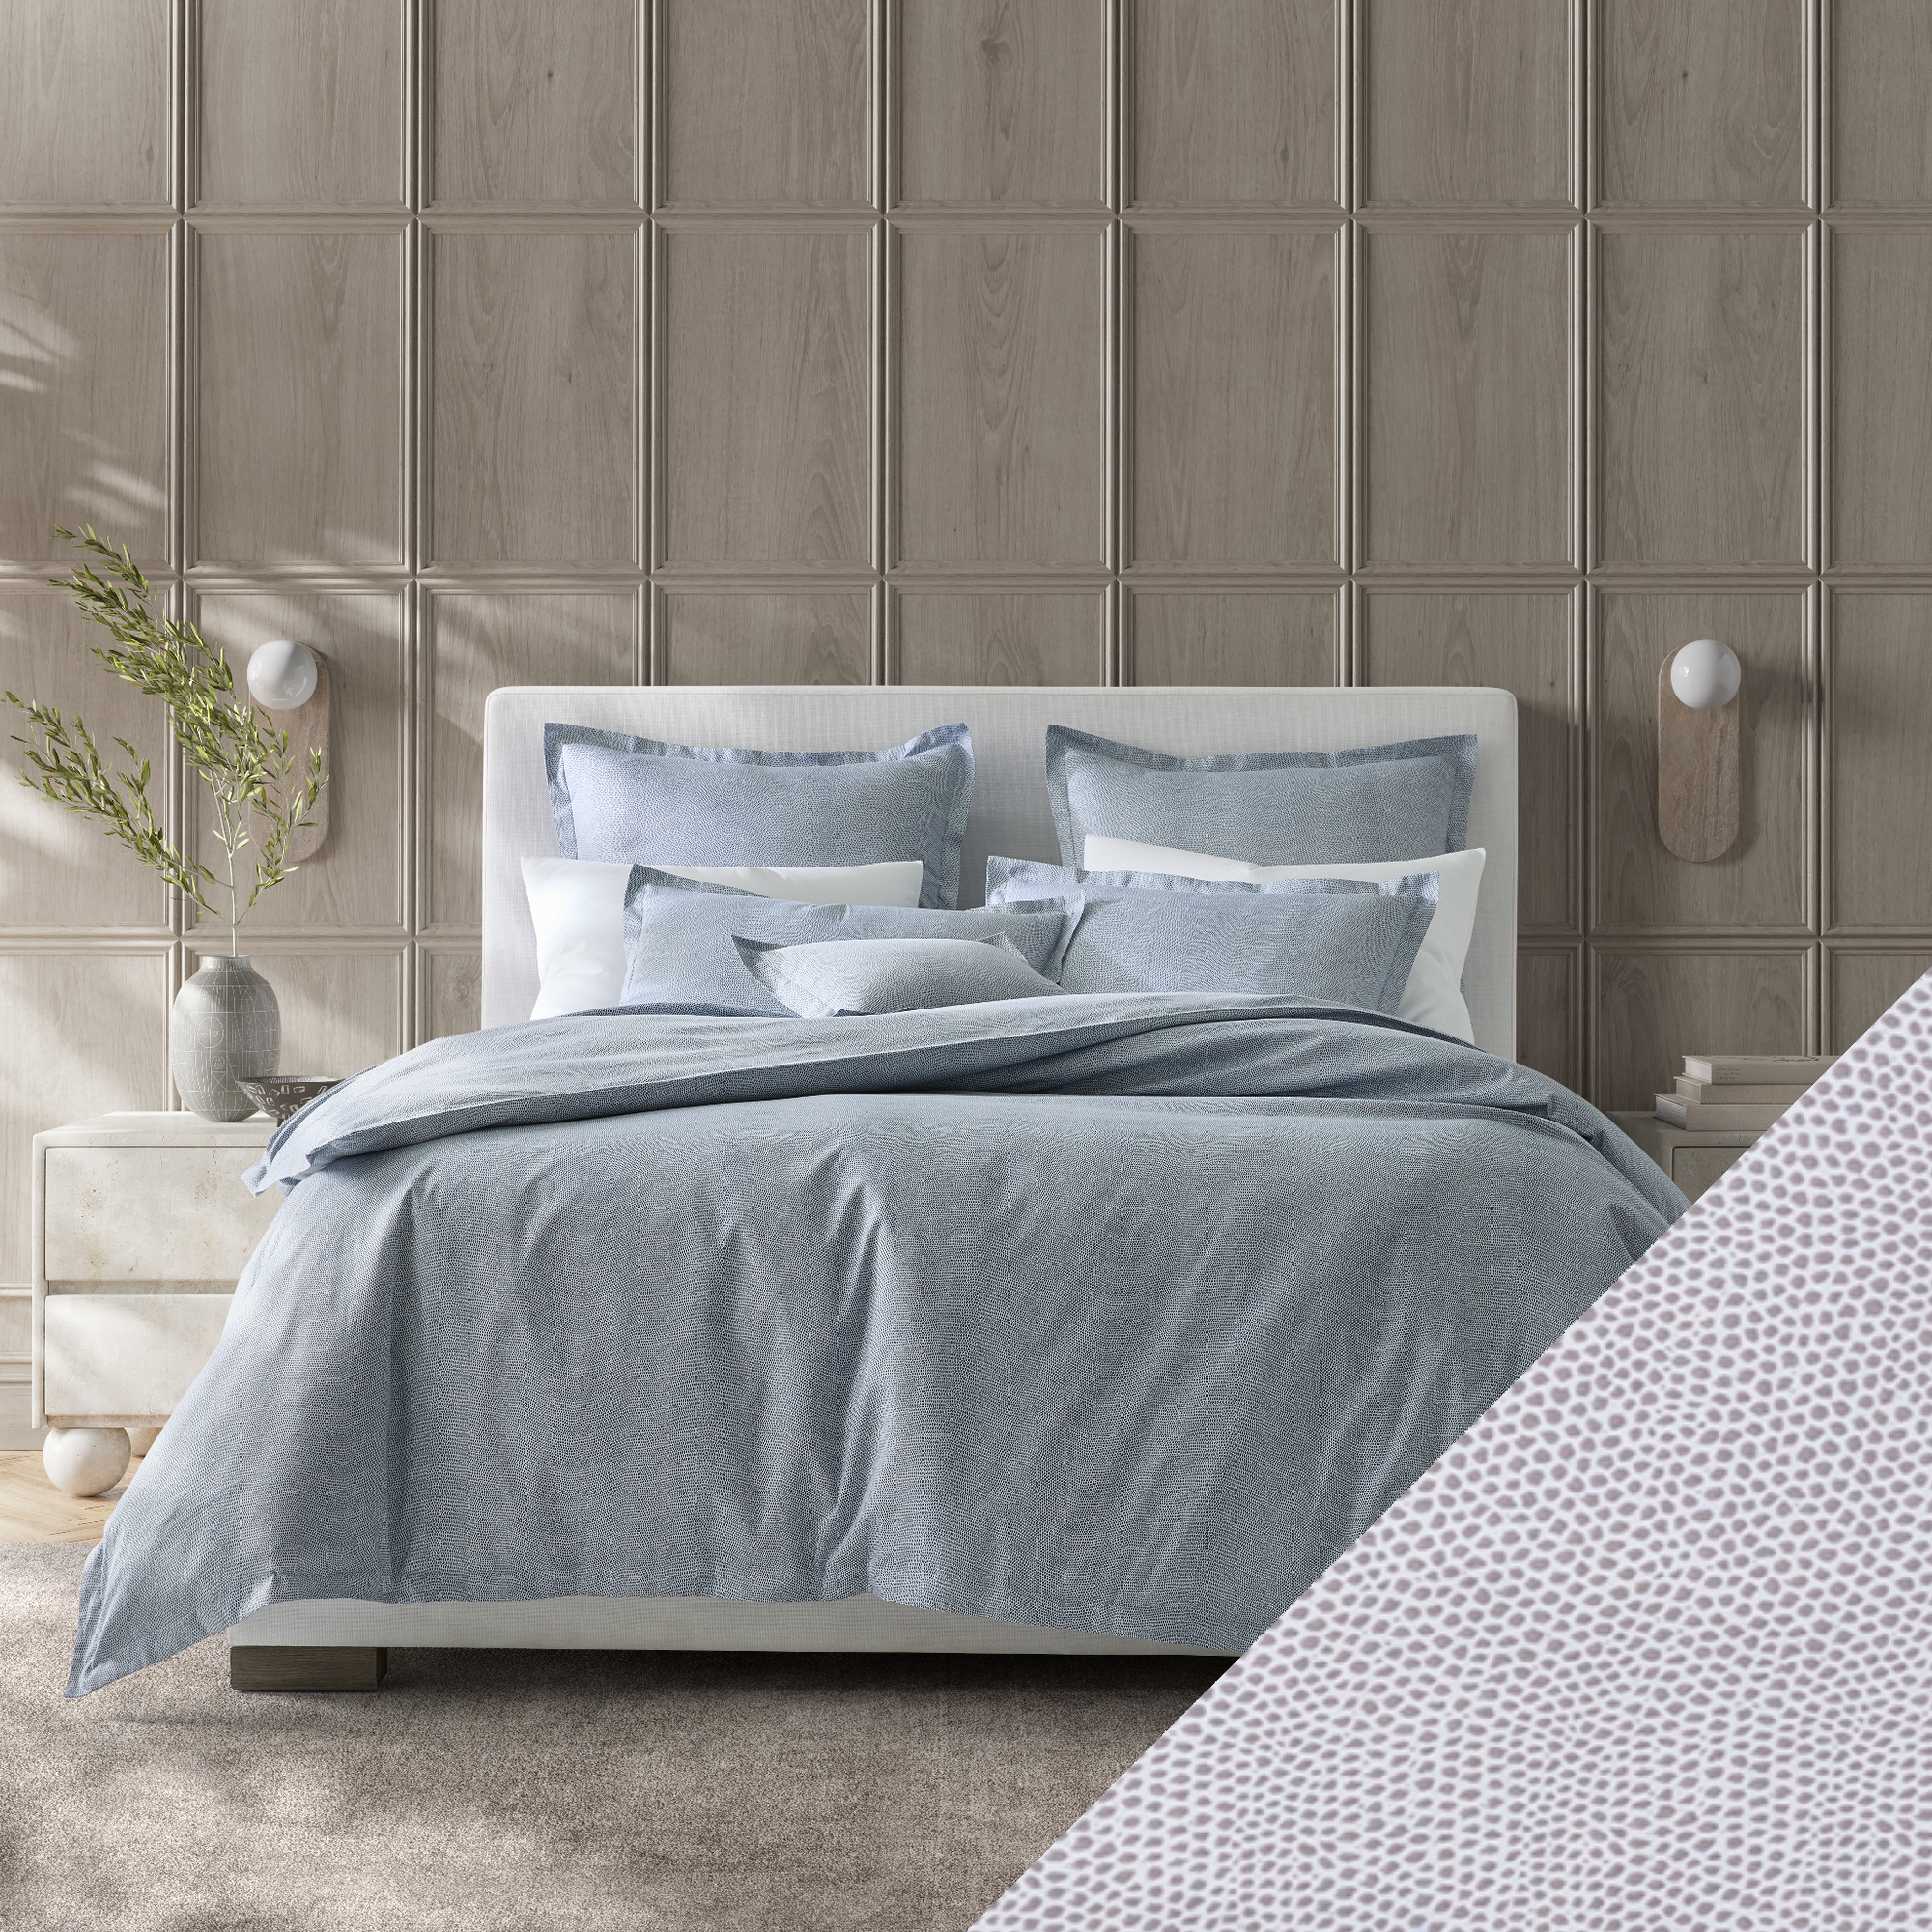 Full Bed Dressed in Steel Blue Matouk Jasper Bedding with Fawn Swatch